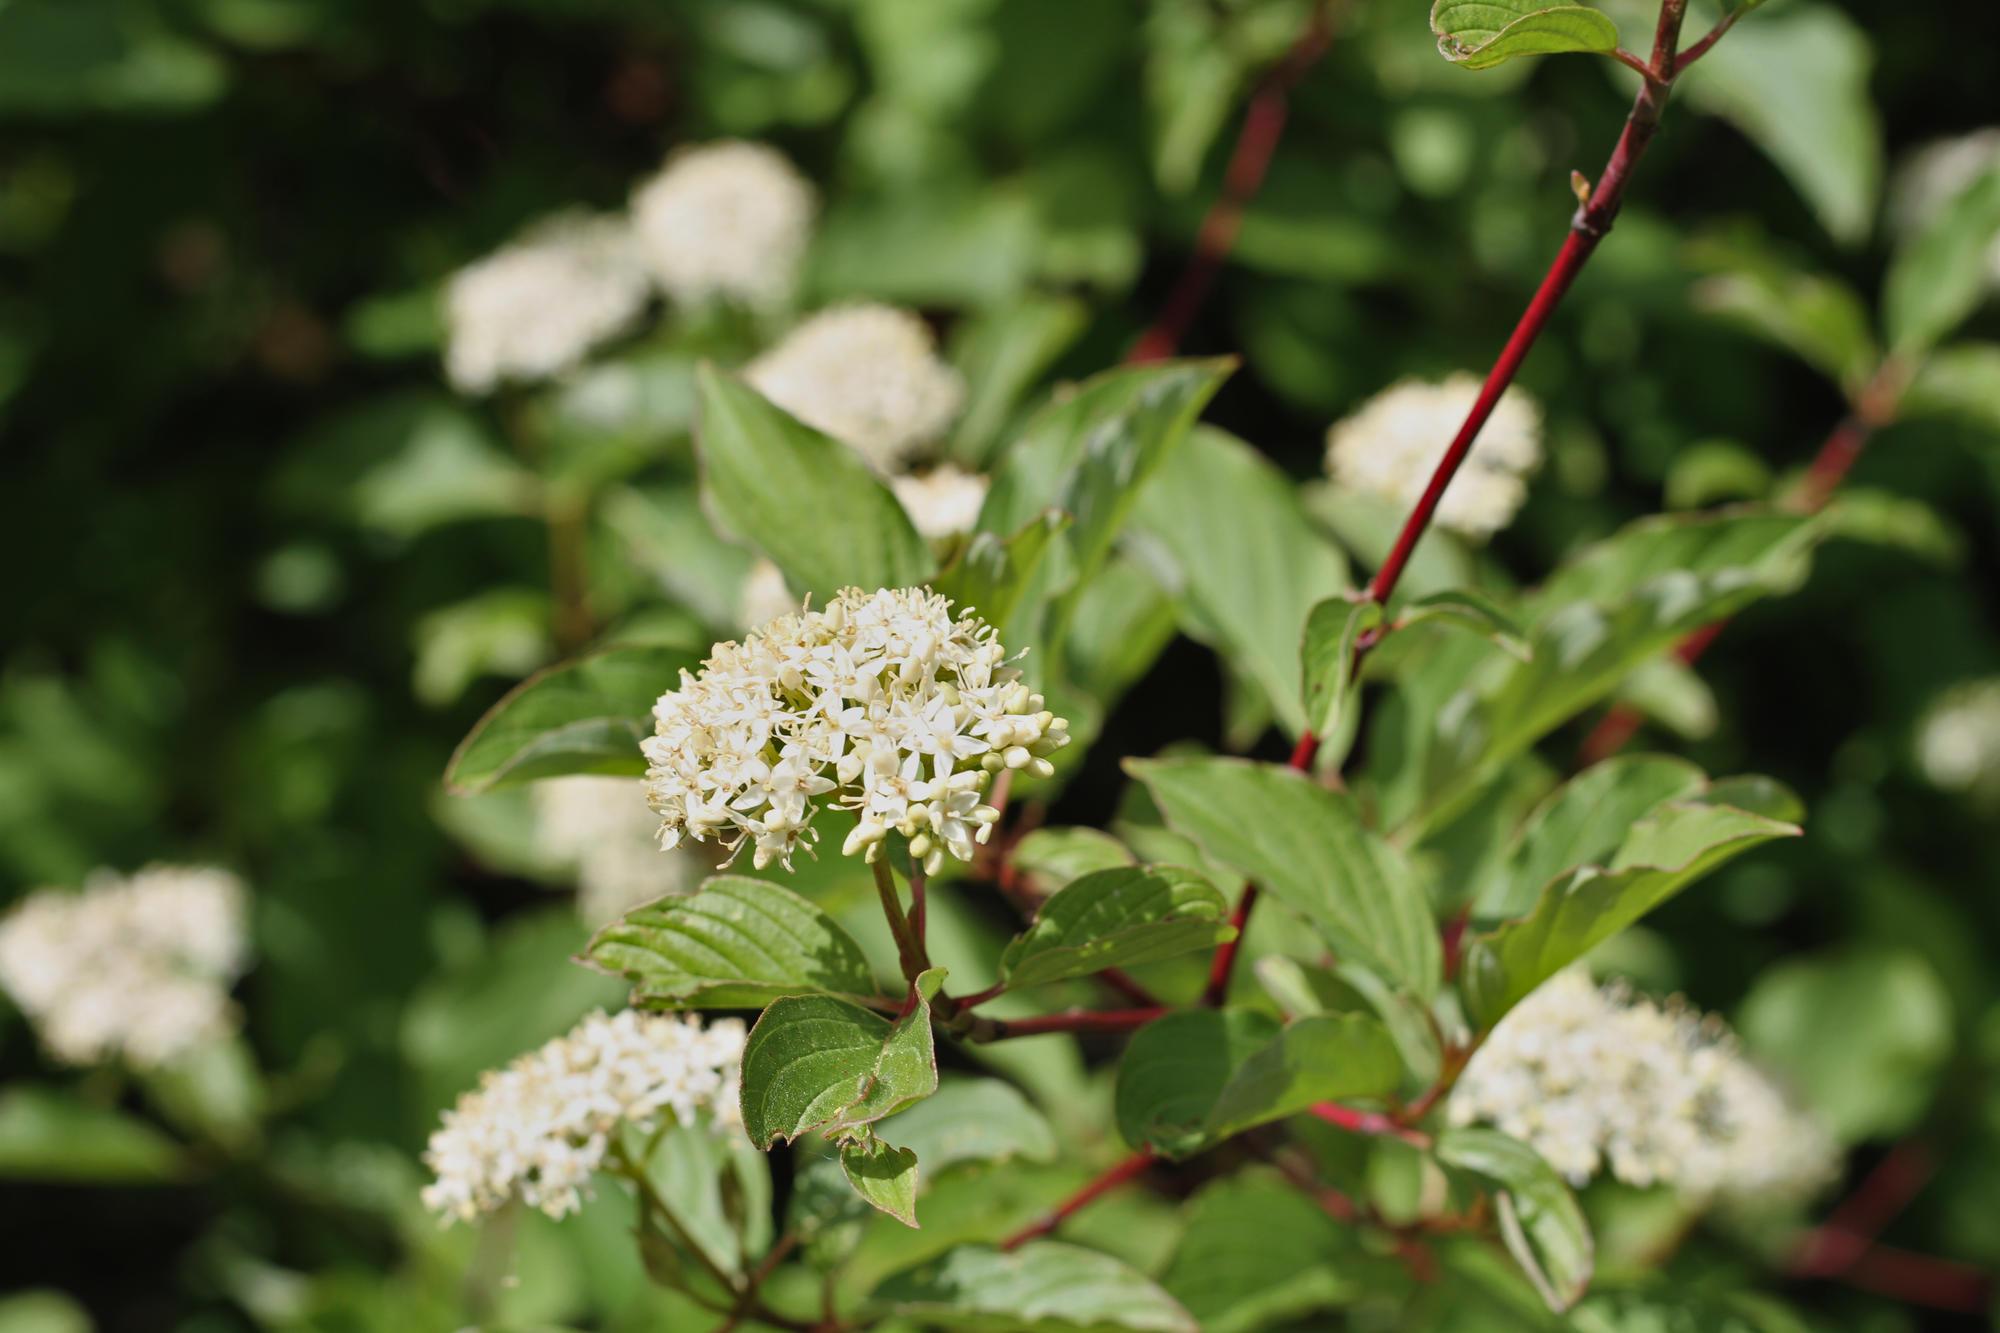 clusters of white composite flowers on bush with red stems